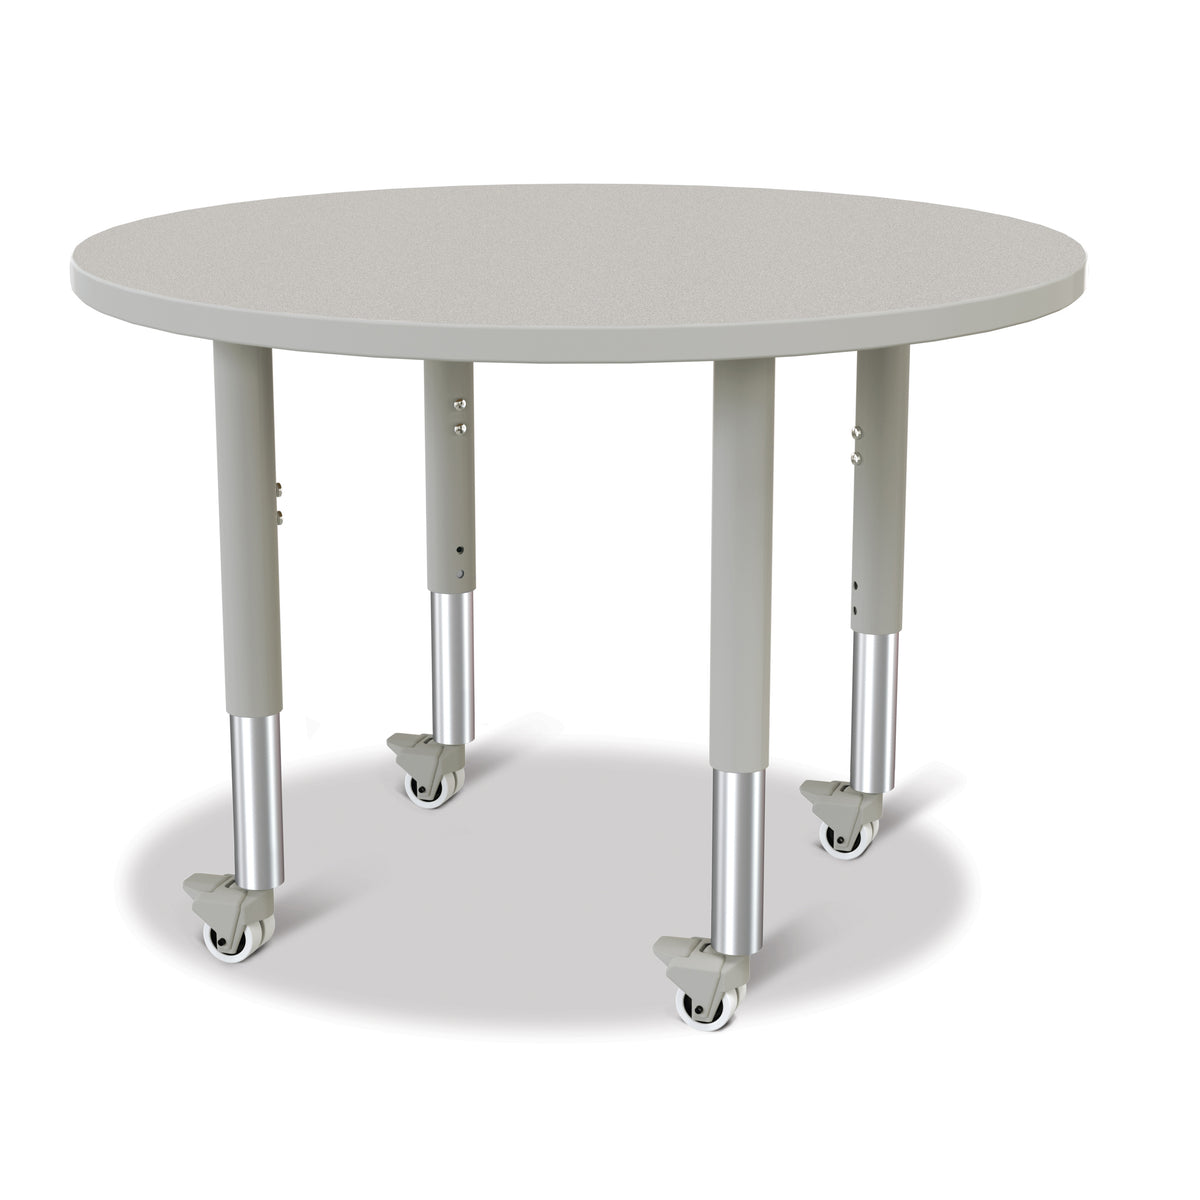 6488JCM000, Berries Round Activity Table - 36" Diameter, Mobile - Freckled Gray/Gray/Gray